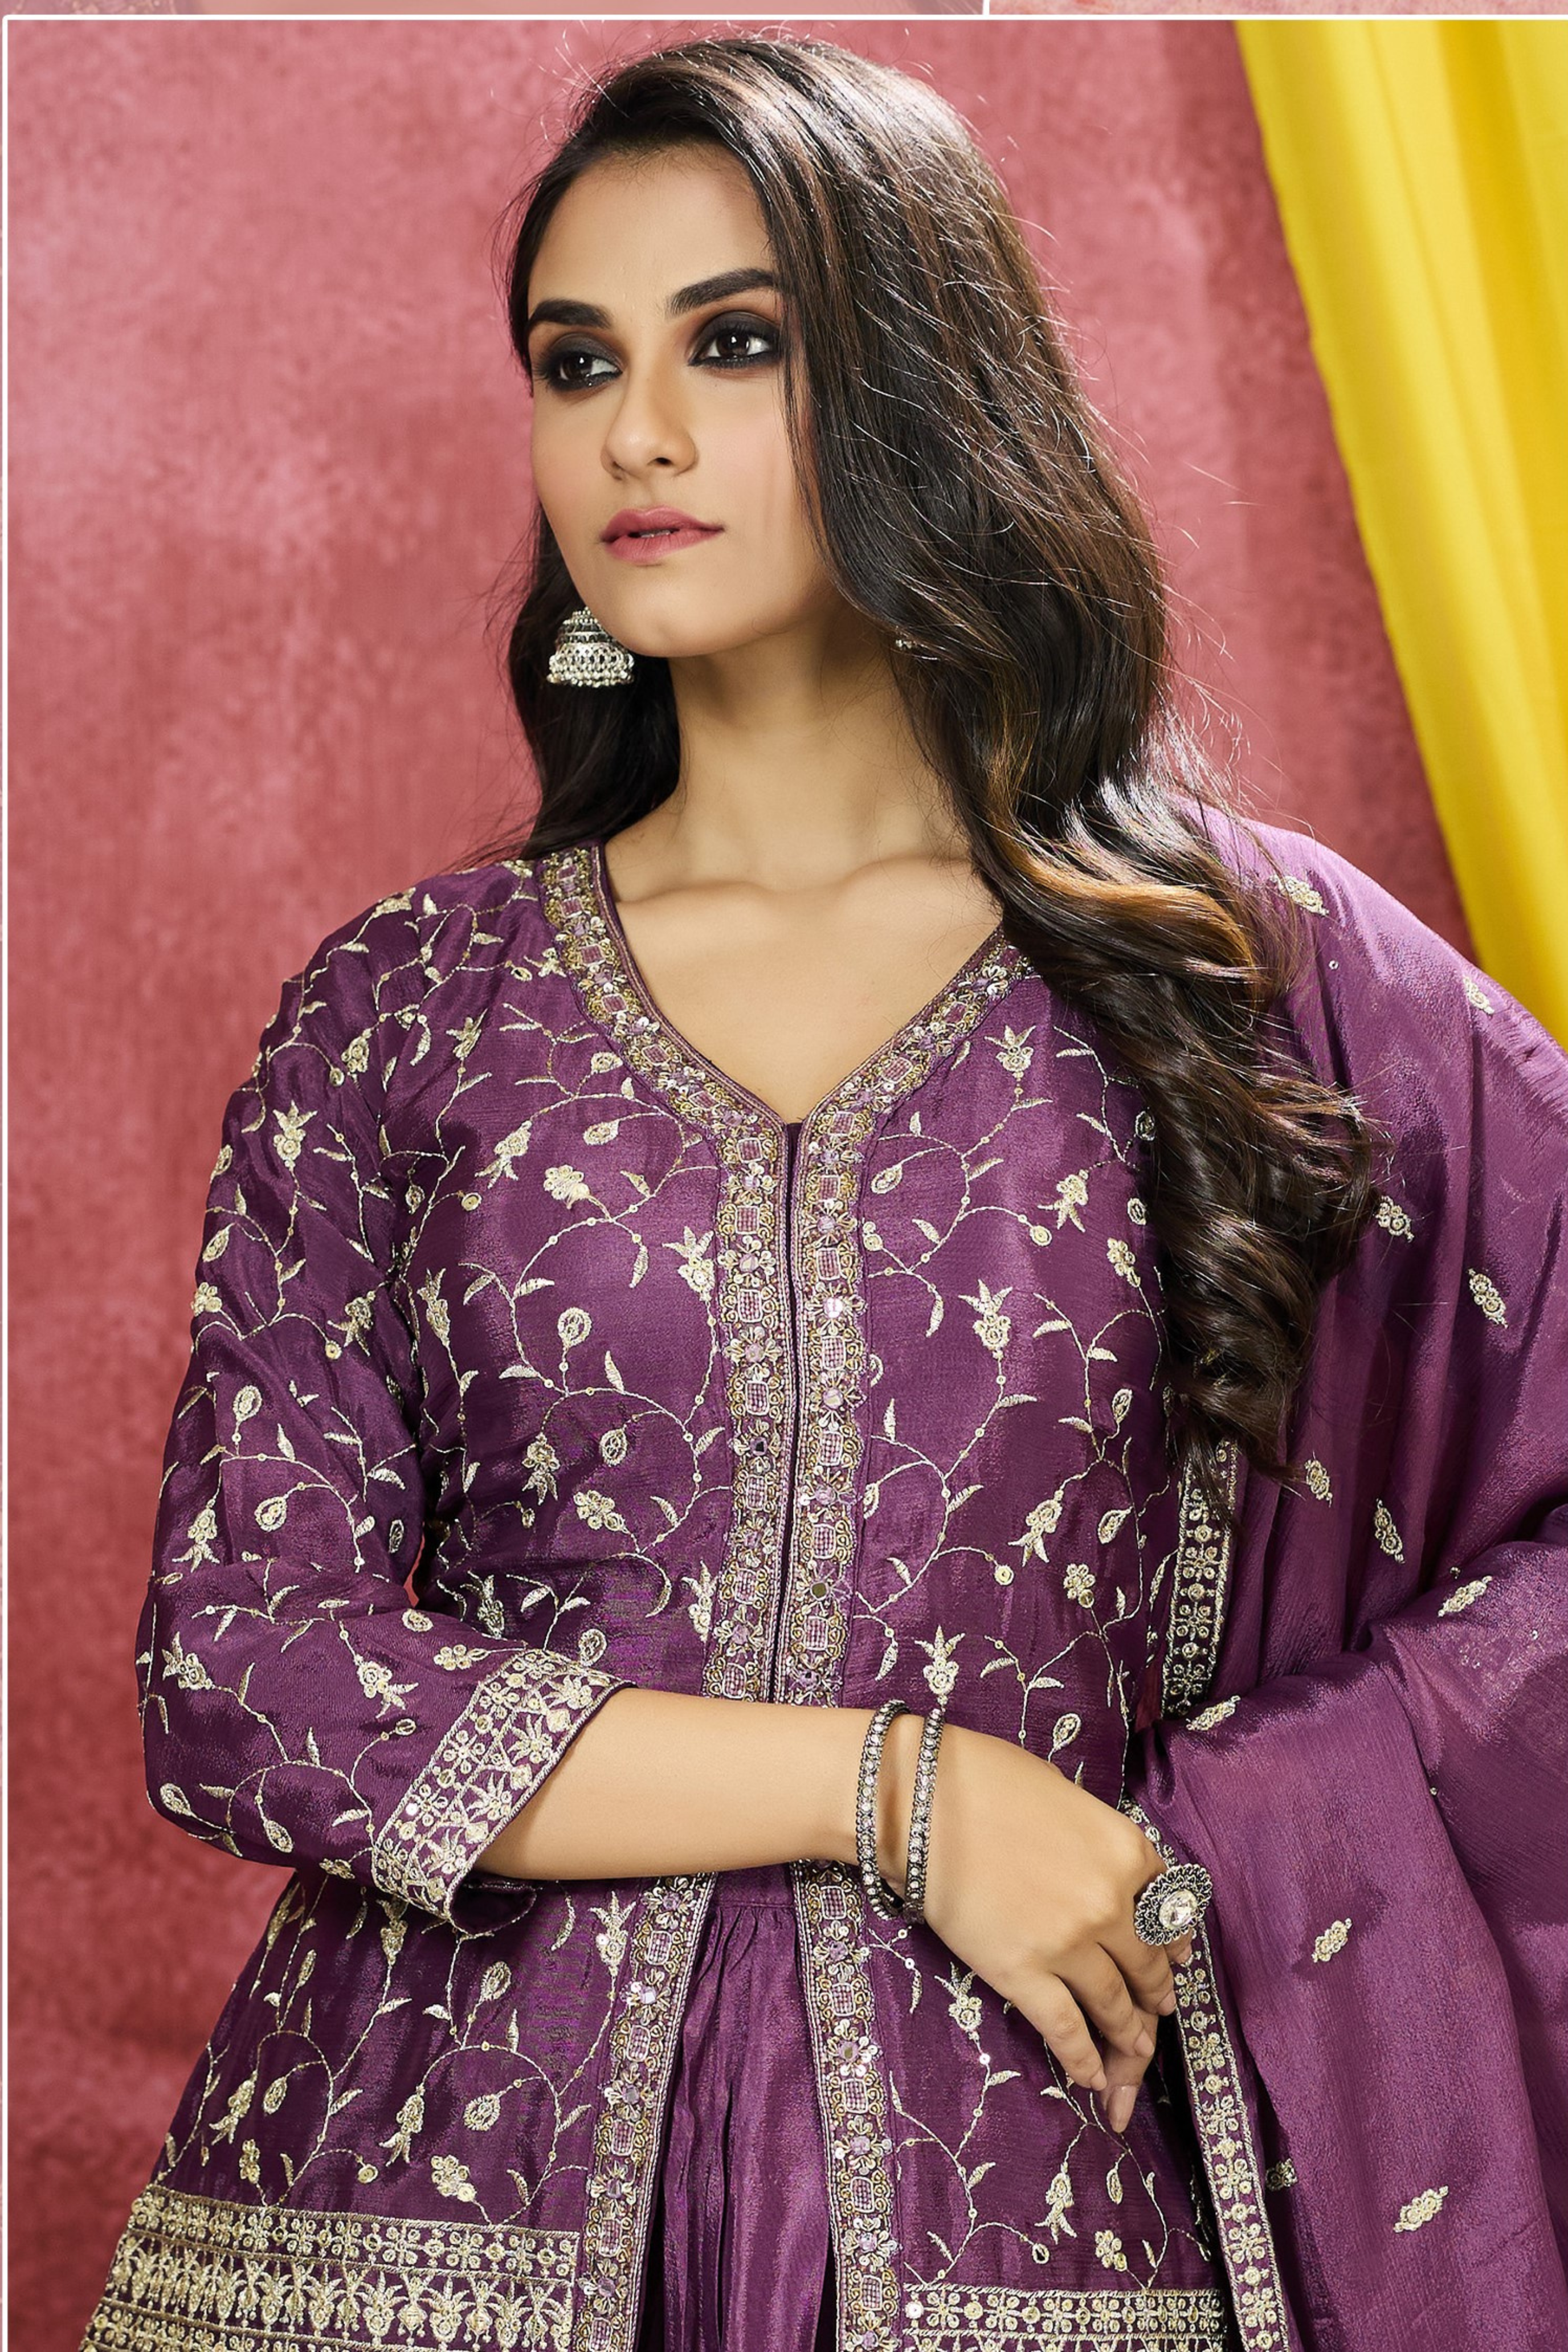 Look effortlessly classy in this old mauve peplum top with floral embroidery. Constructed from lightweight georgette fabric, this set is comfortable and perfect for any occasion. The matching skirt and dupatta complete the look and add a royal touch.